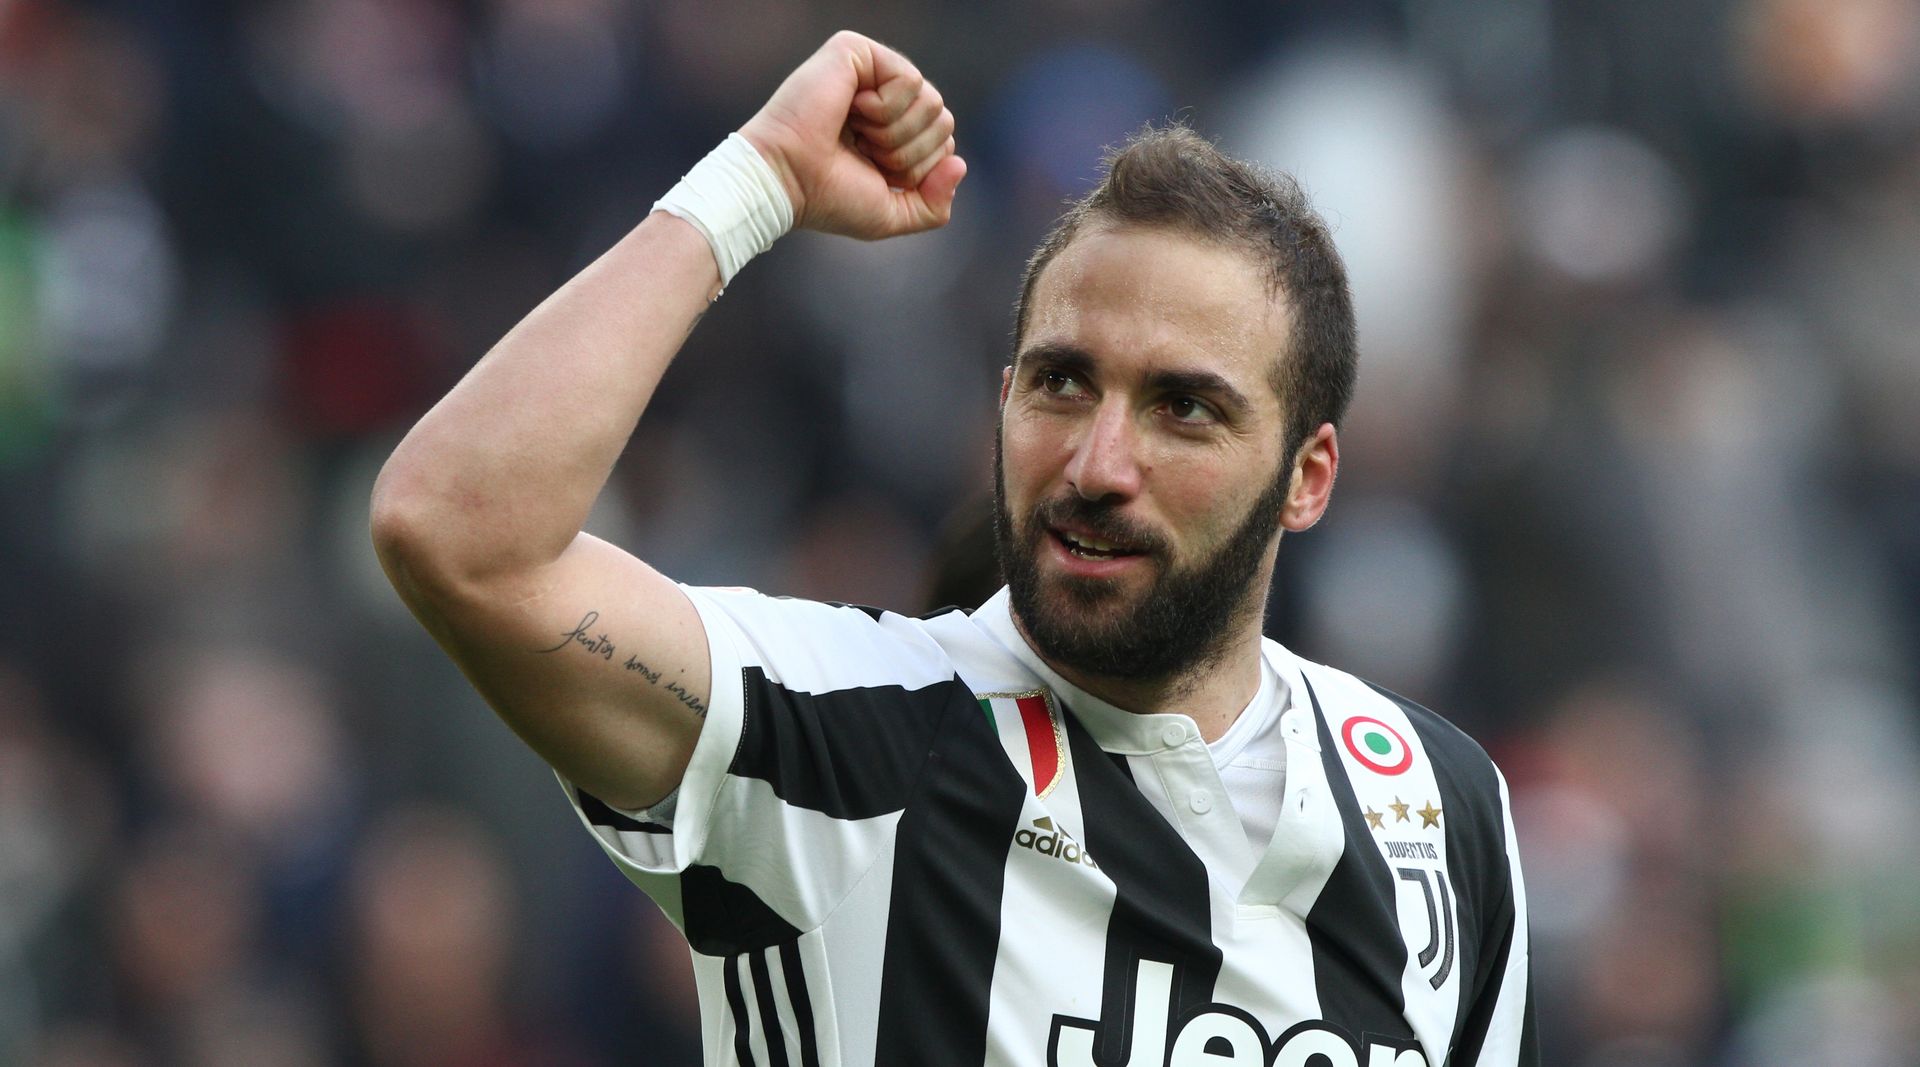 <p>                     During the 2015/16 campaign, Gonzalo Higuain equalled a Serie A record by racking up 36 goals for Napoli – in only 35 appearances.                   </p>                                      <p>                     Needless to say, that secured the robust Argentine striker the <em>Capocannoniere</em> – and he went and followed it up with 24 more league goals for his new club, Juventus, the very next season, firing them to his first of three Scudetti.                   </p>